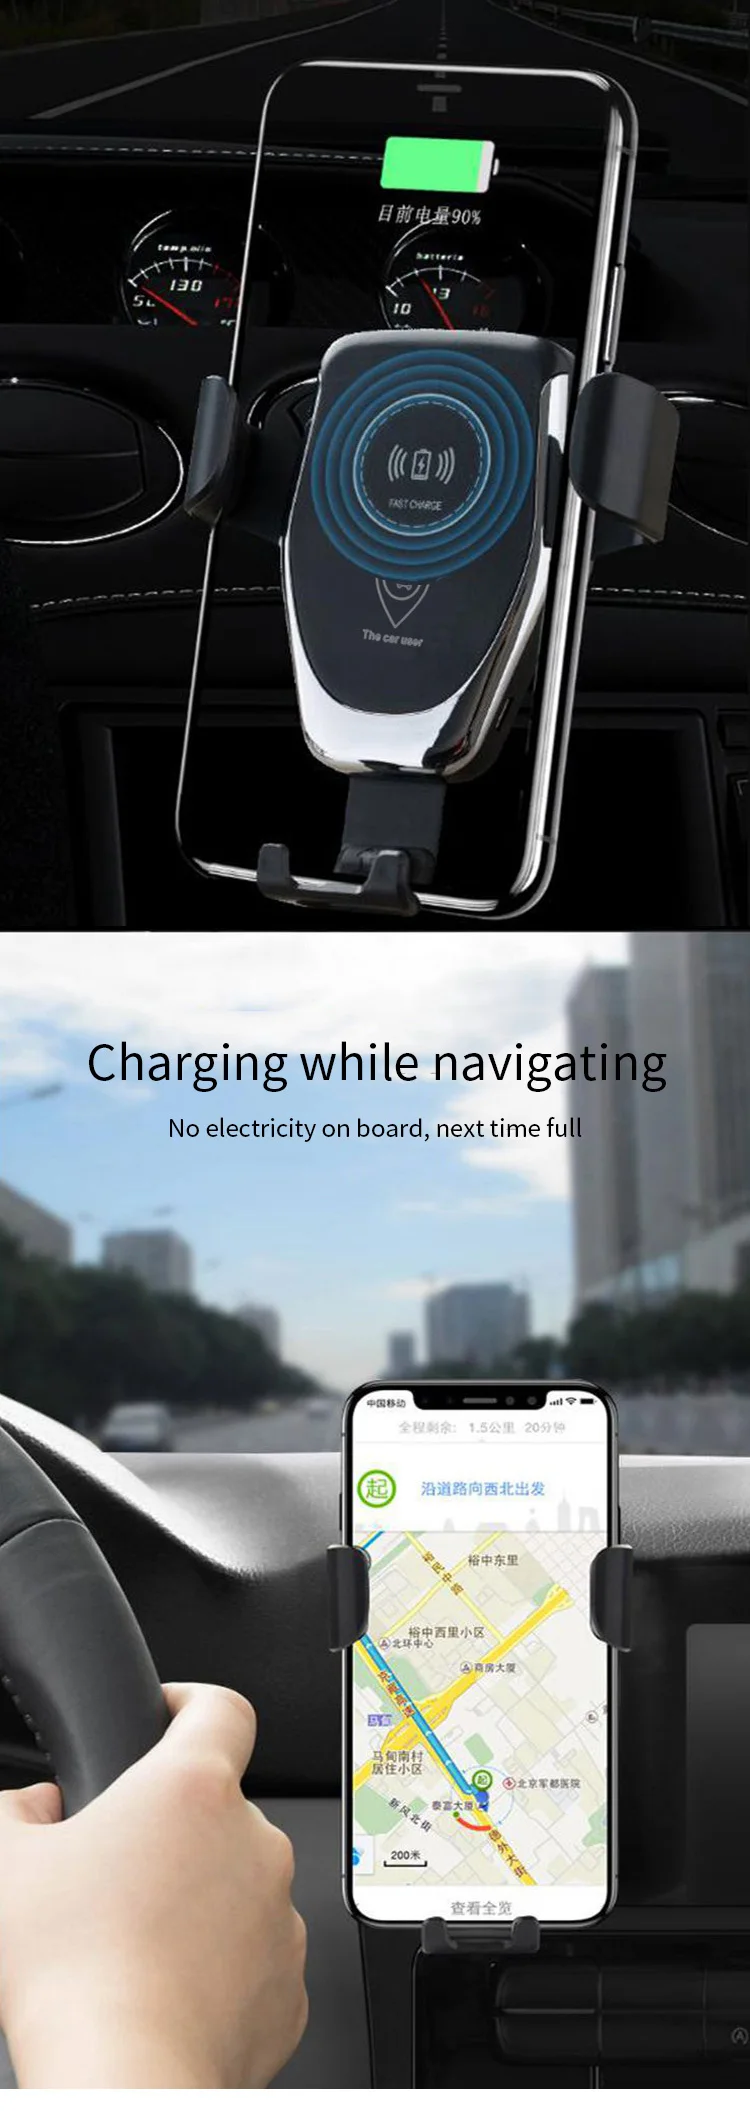 Smart Qi  Wireless  Station  Adapter Car  Mobile 10W  Phone Handy  Portable Smart Wireless Charger Car Mount